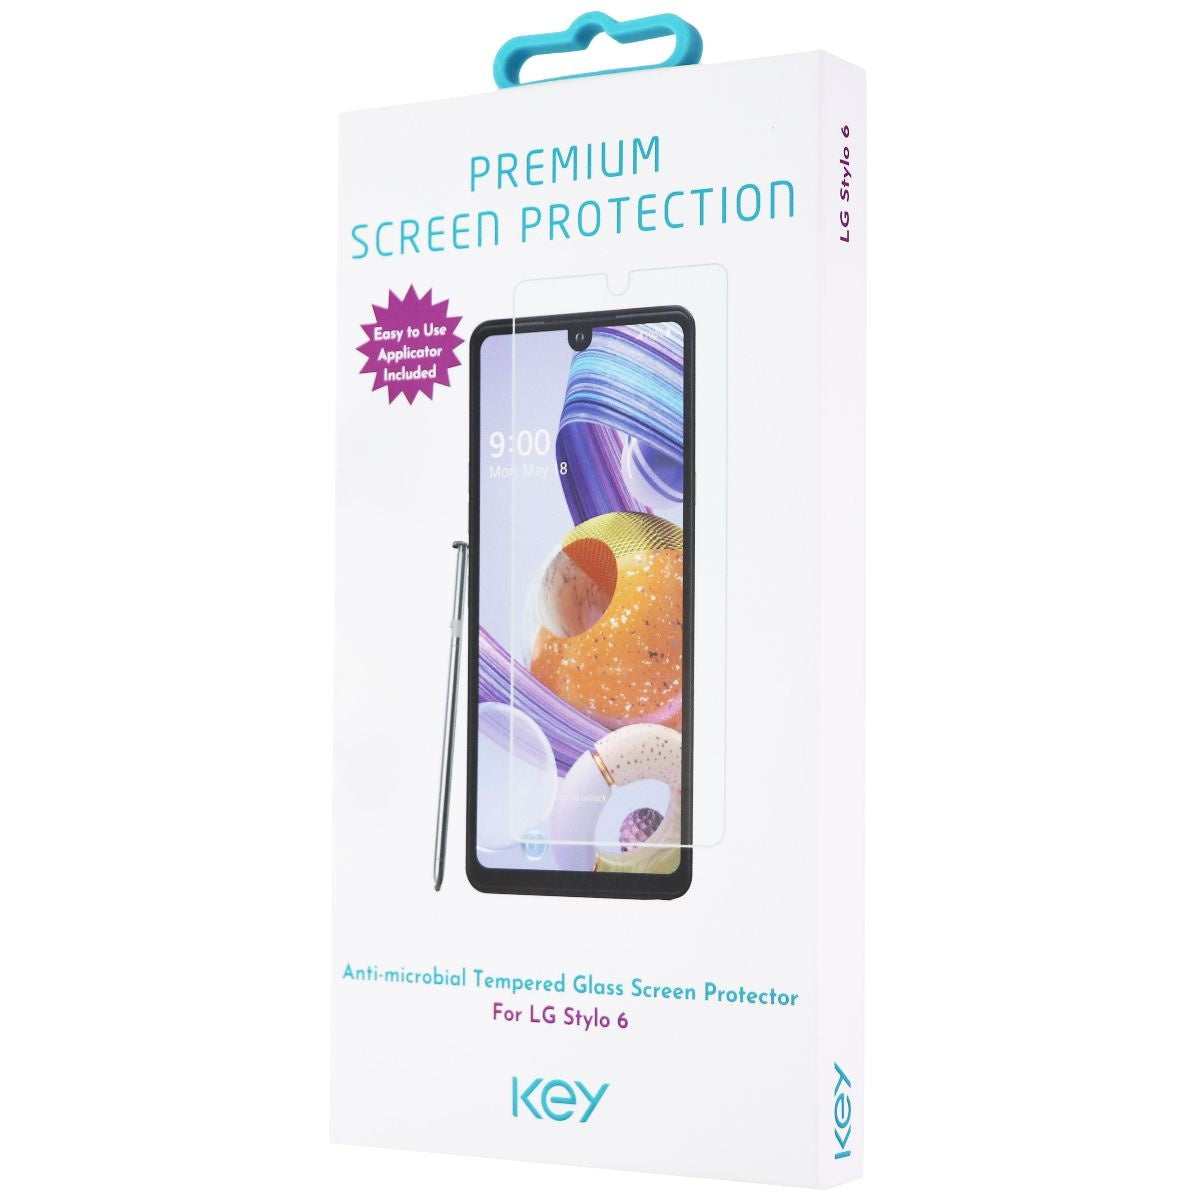 Key Premium Tempered Glass Screen Protector for LG Stylo 6 Cell Phone - Screen Protectors Key    - Simple Cell Bulk Wholesale Pricing - USA Seller